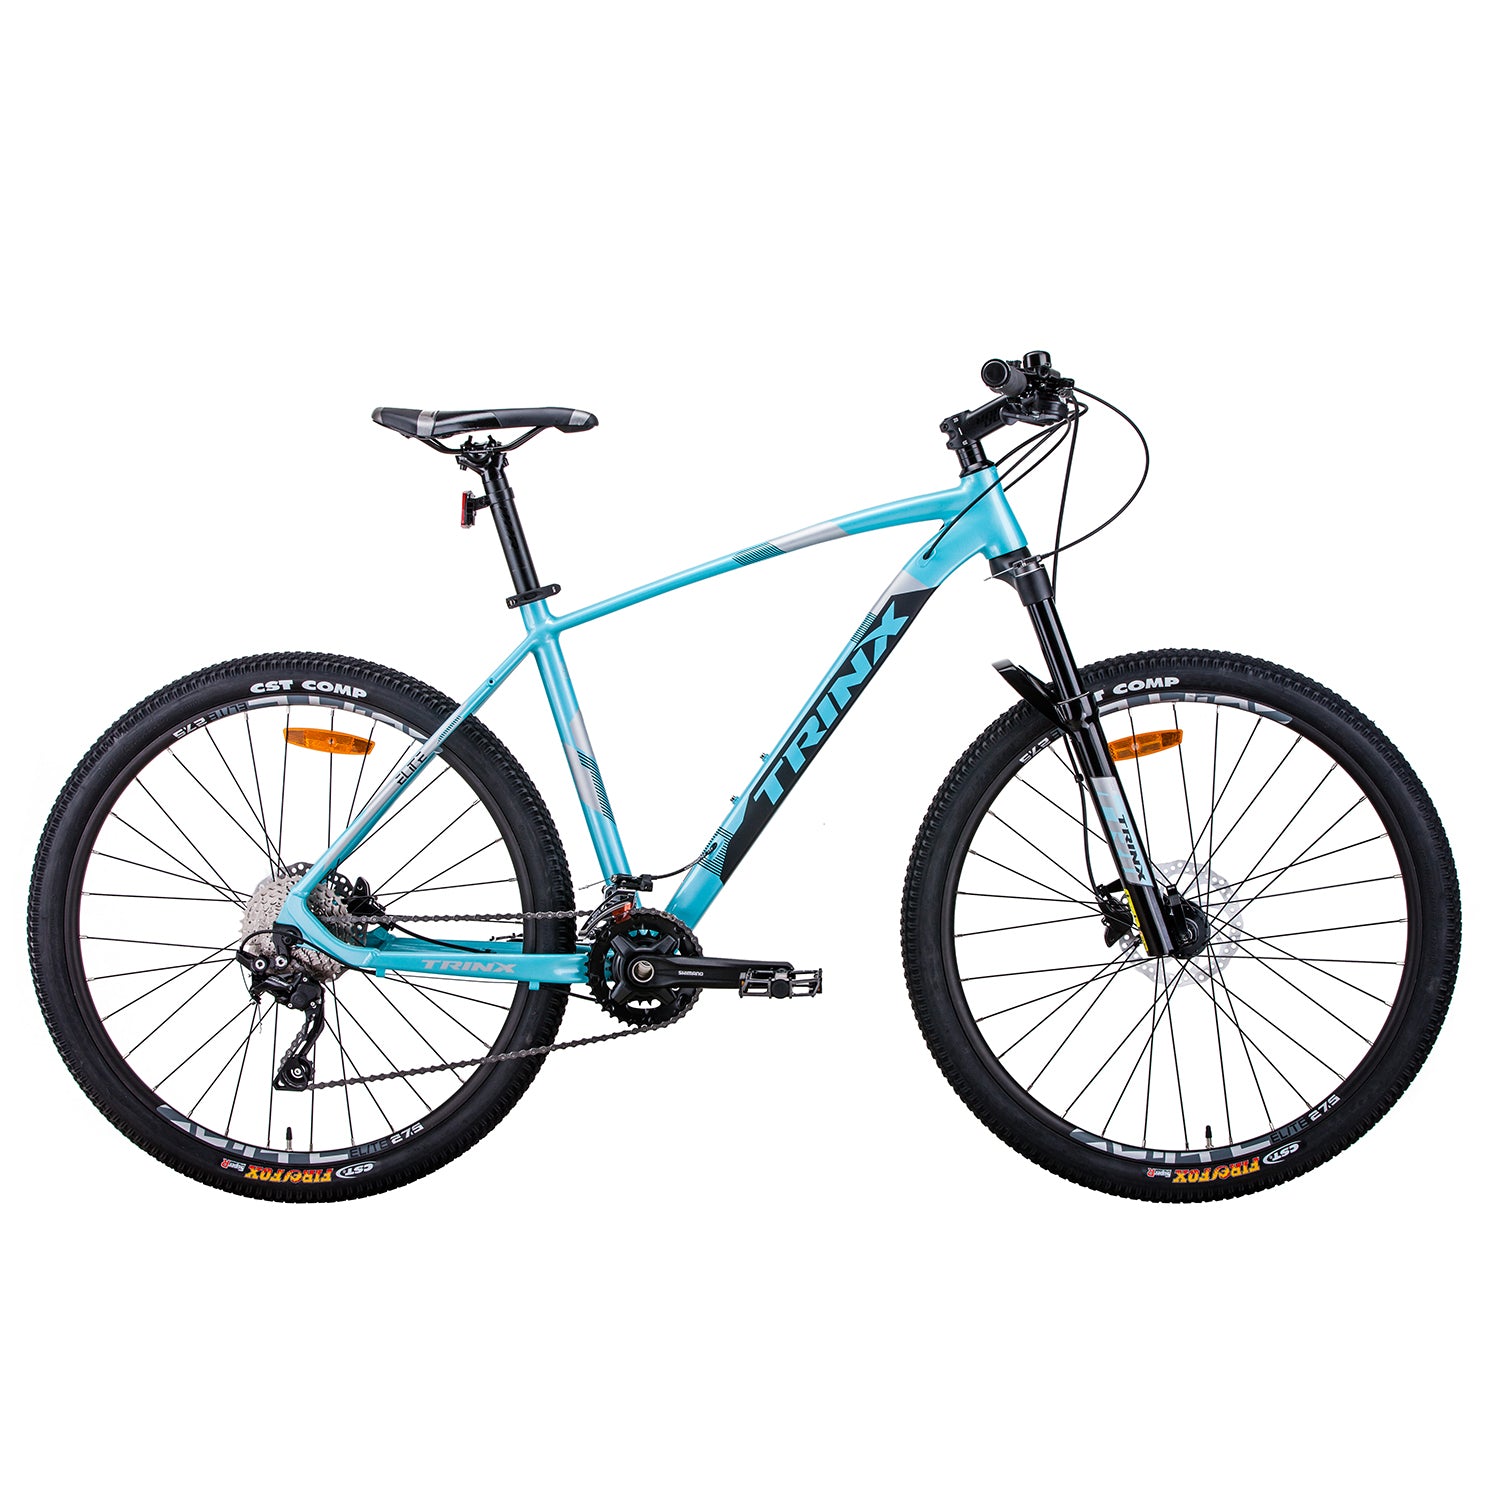 Trinx X7 Elite 27.5 Inch MTB Mountain Bicycle Shimano Deore 20 Speed 19 Inches Frame